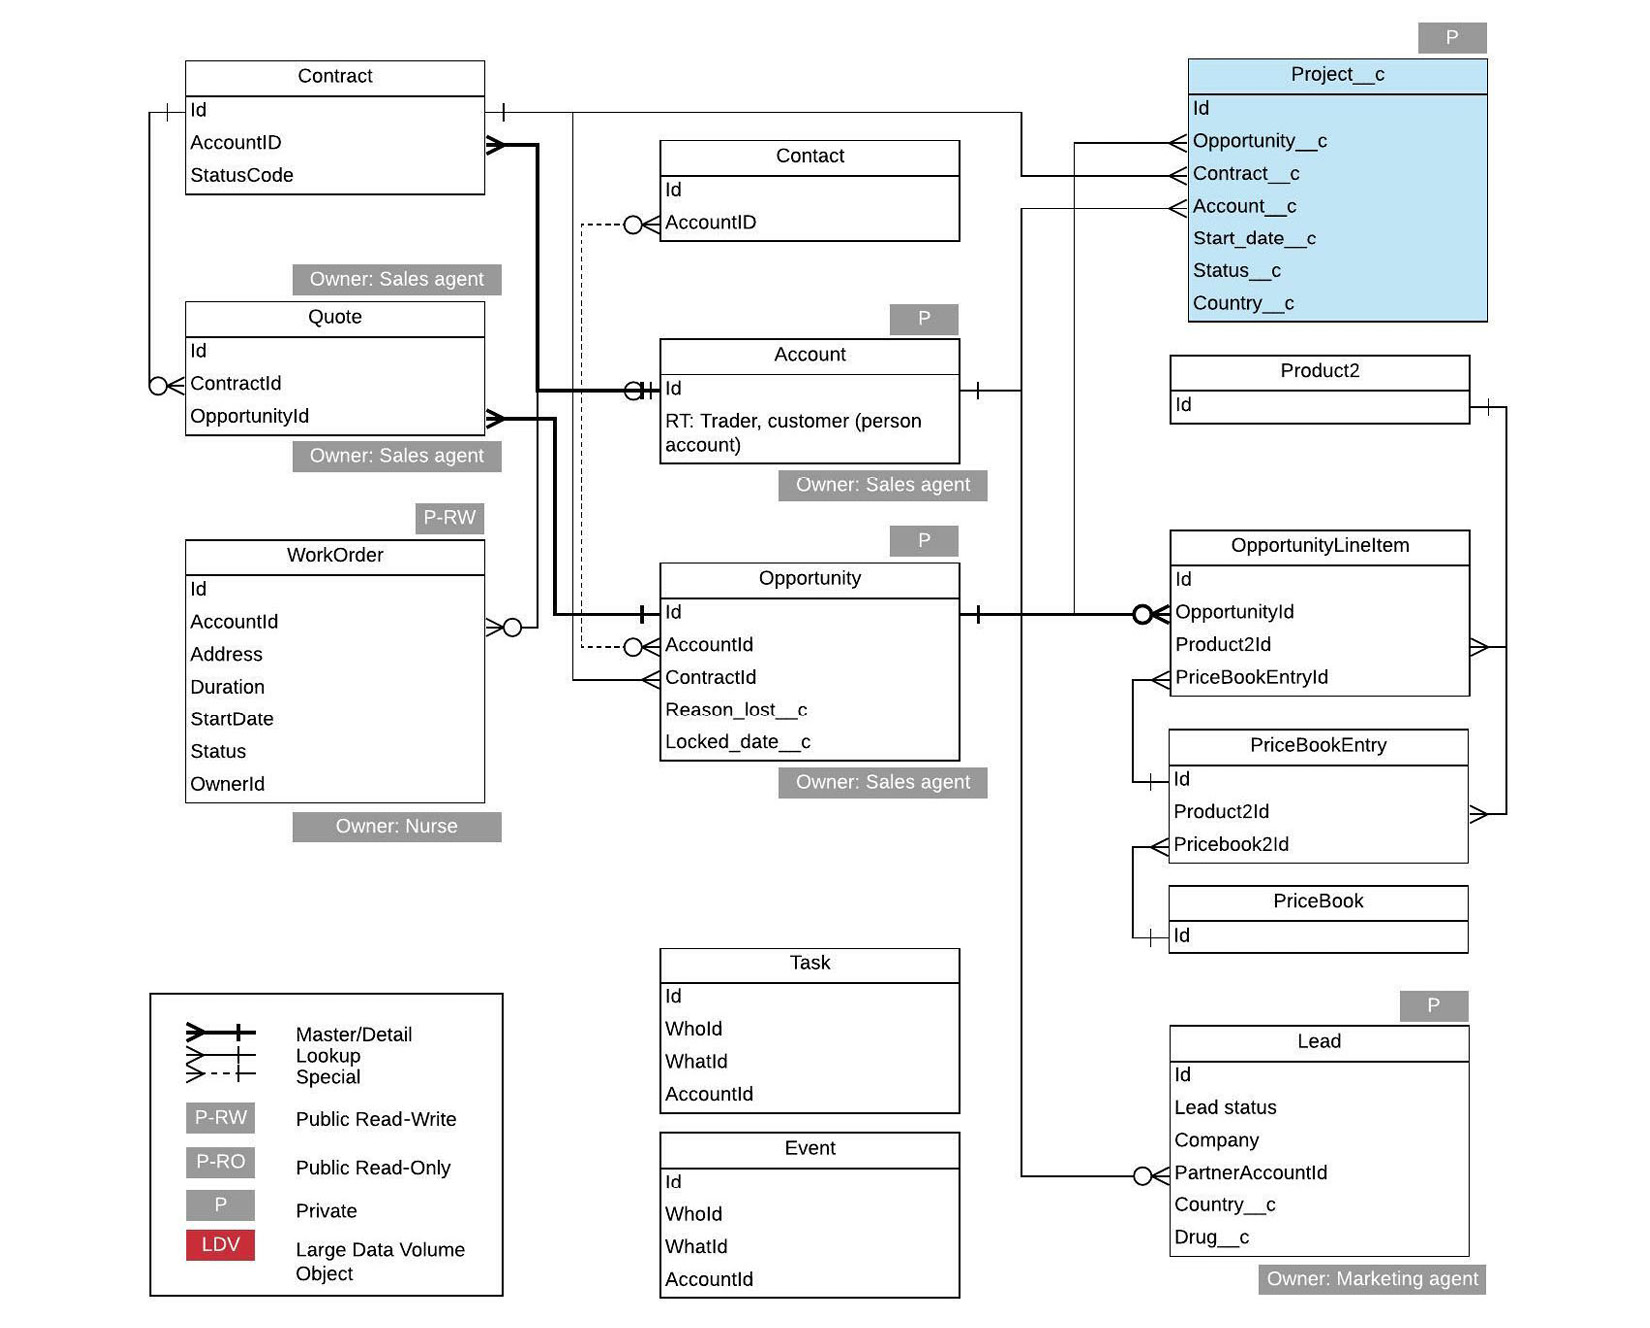 This is the final draft of the data model diagram.